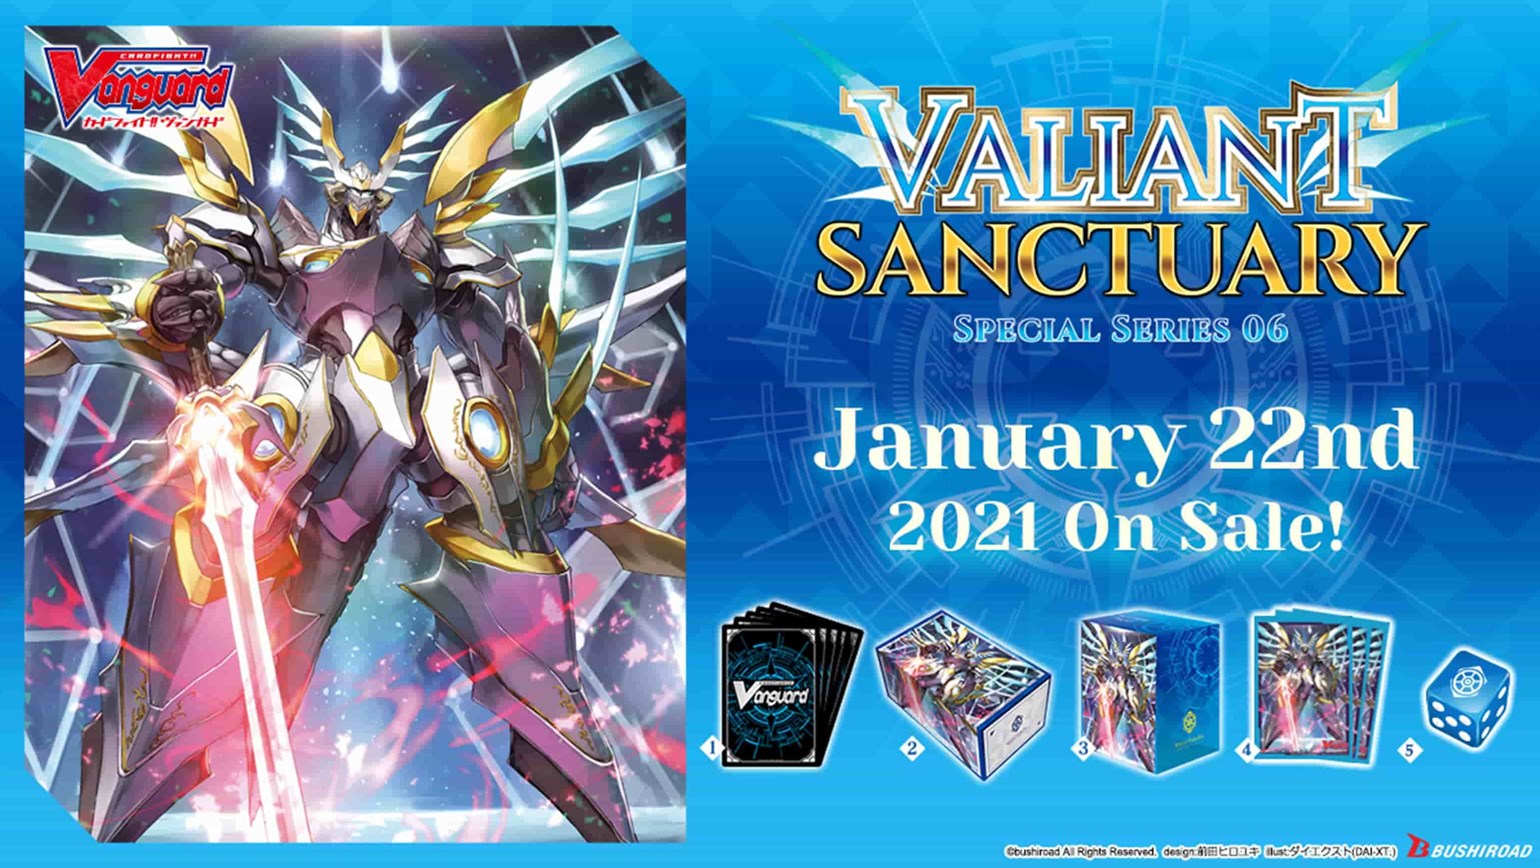 New English Edition Special Series 06 “Valiant Sanctuary” is Coming to Stores on January 22nd!